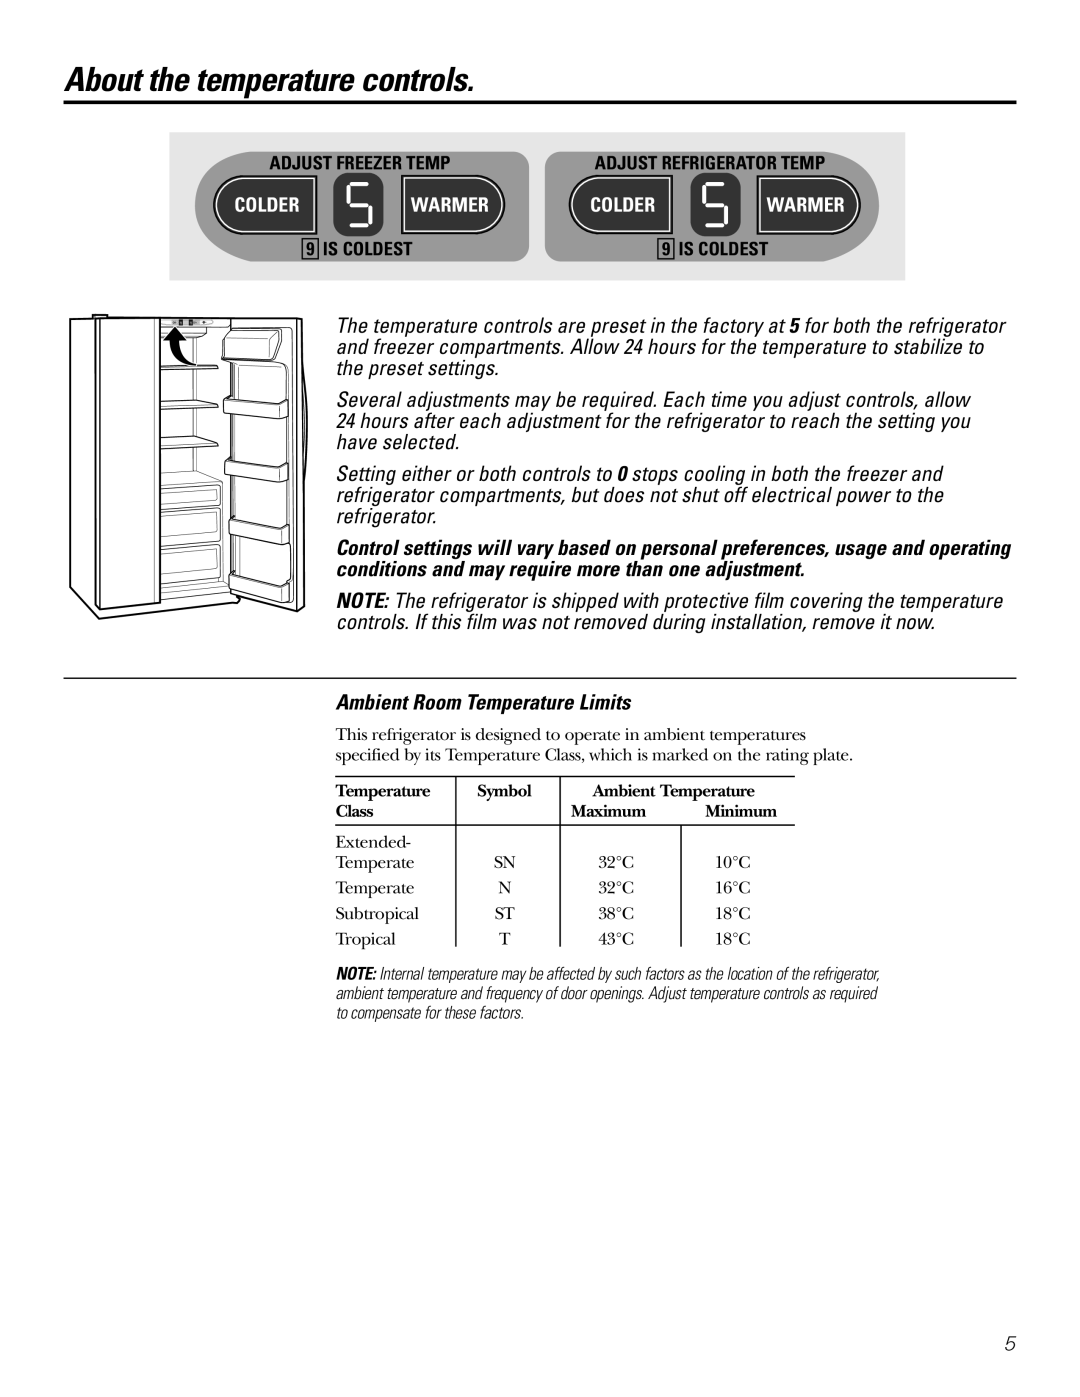 Hotpoint 23 operating instructions About the temperature controls, Ambient Room Temperature Limits, Colder, Warmercolder 